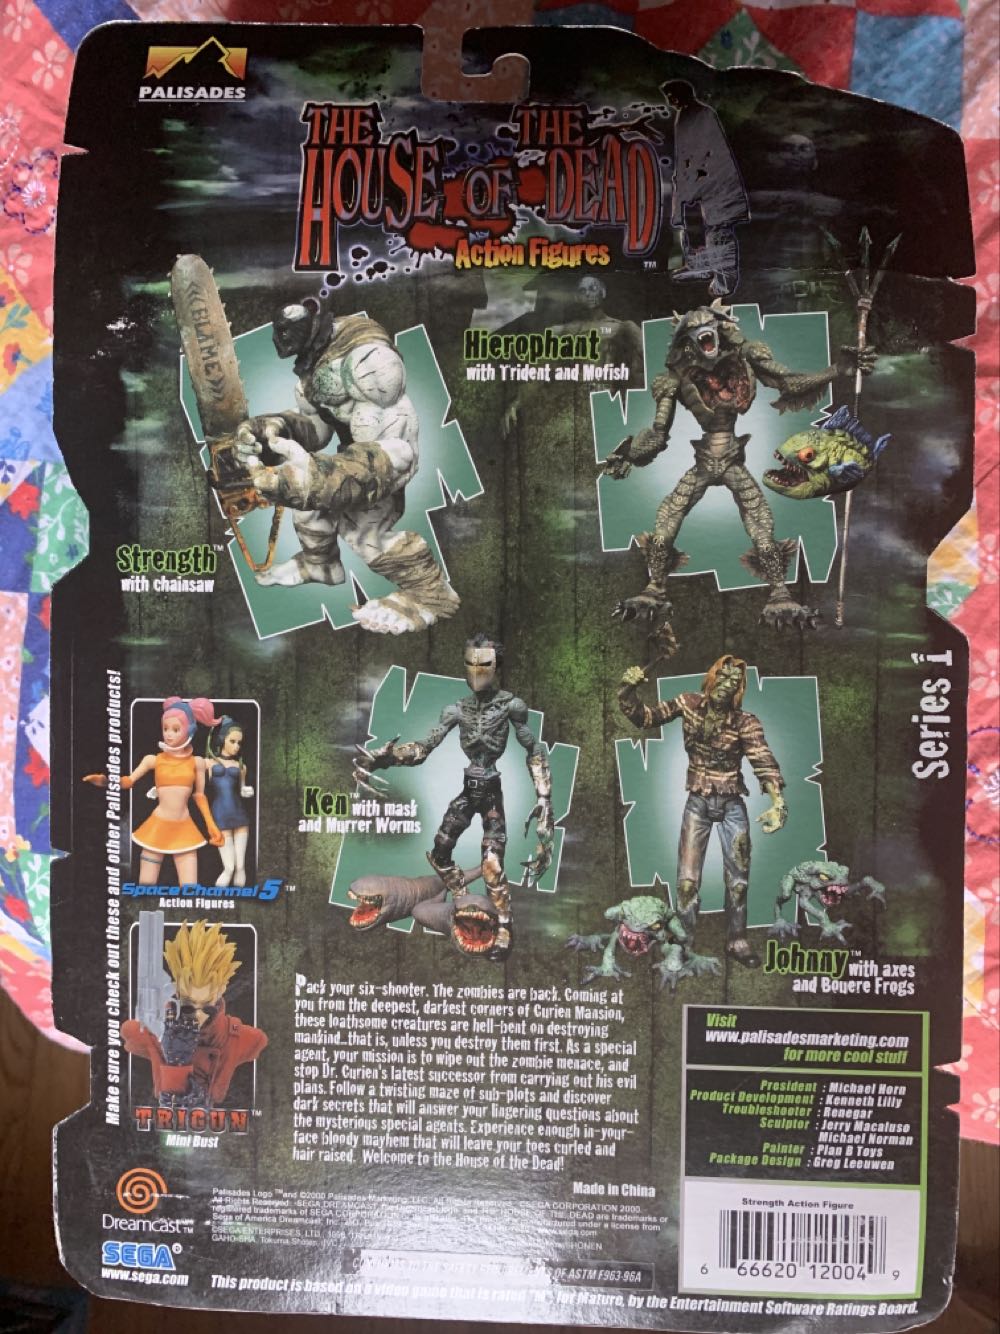 The House Of The Dead Palisades Toys Action Figure Strength With Chainsaw - Palisades Toys action figure collectible [Barcode 666620120049] - Main Image 2